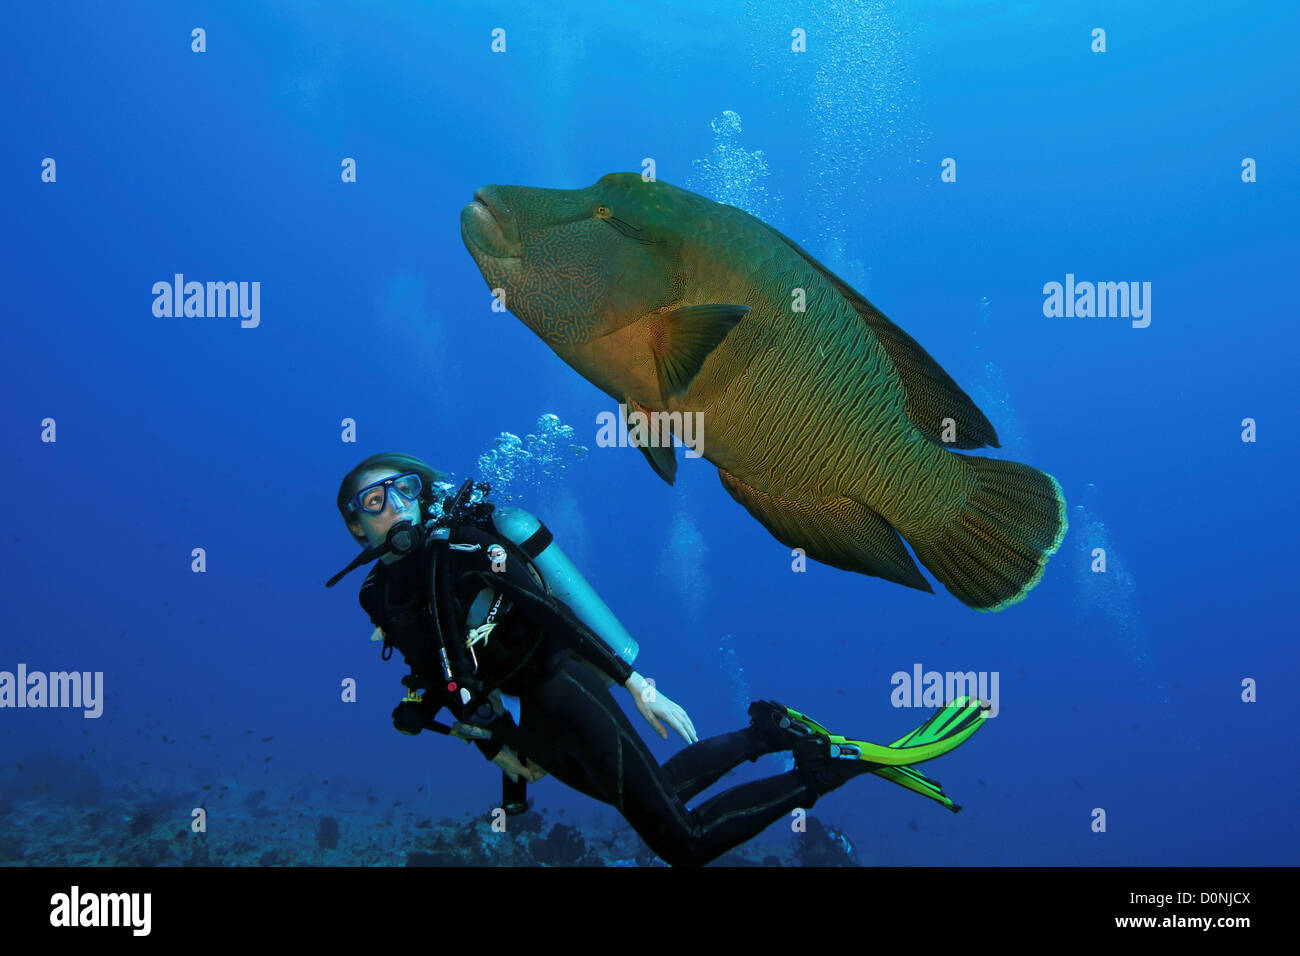 A diver looking Napoleon wrasse also known as humphead wrasse (Cheilinus undulatus) swimming in clear blue waters Felidhu Atoll Stock Photo